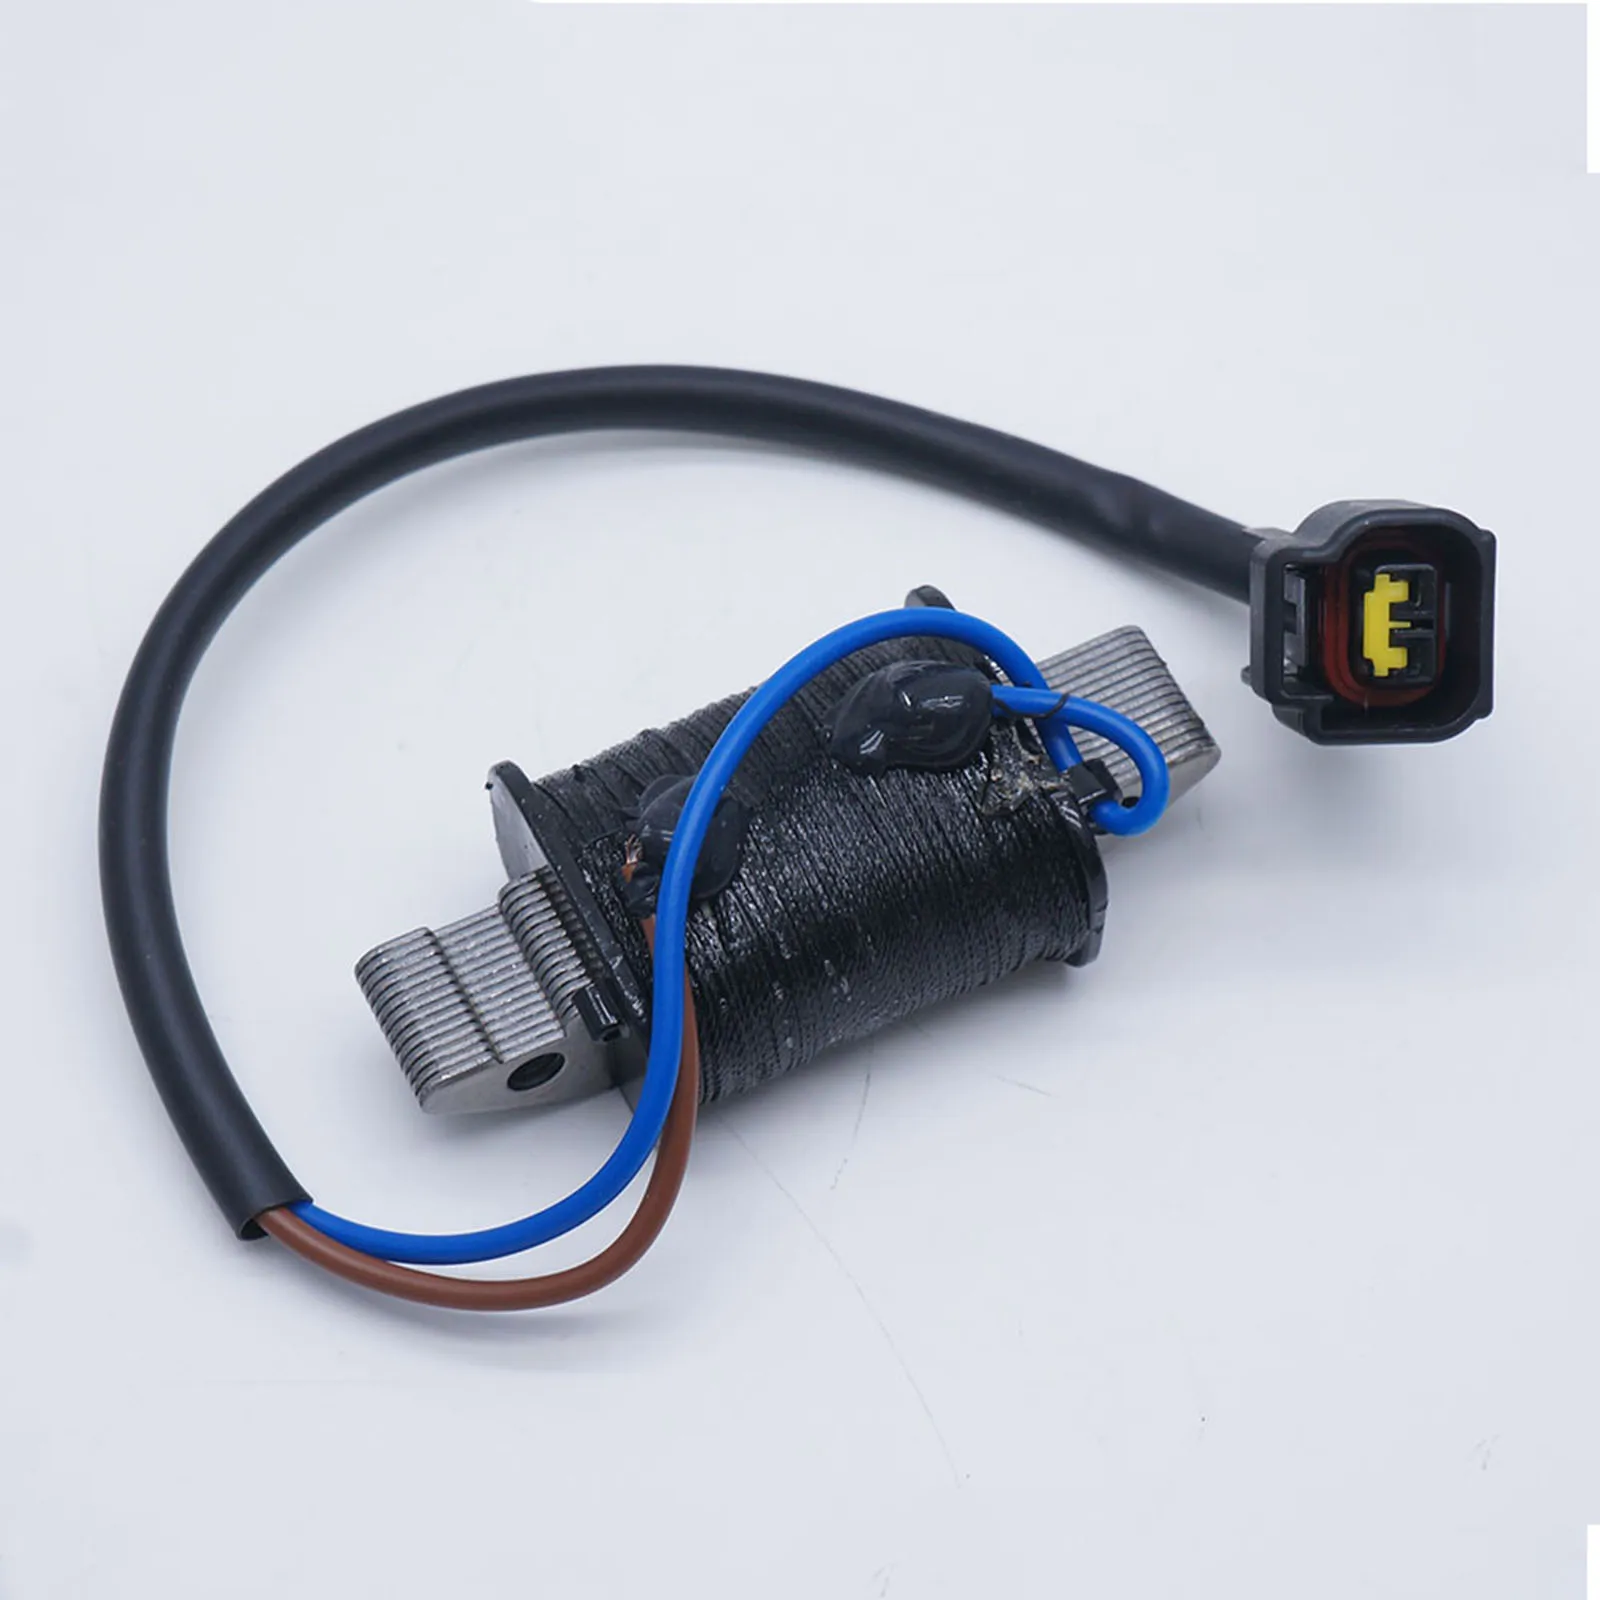 Charge Coil for Yamaha Boat Engine 70HP 60HP with Plug 6H2-85520-01-00, Easy To Install No Instruction